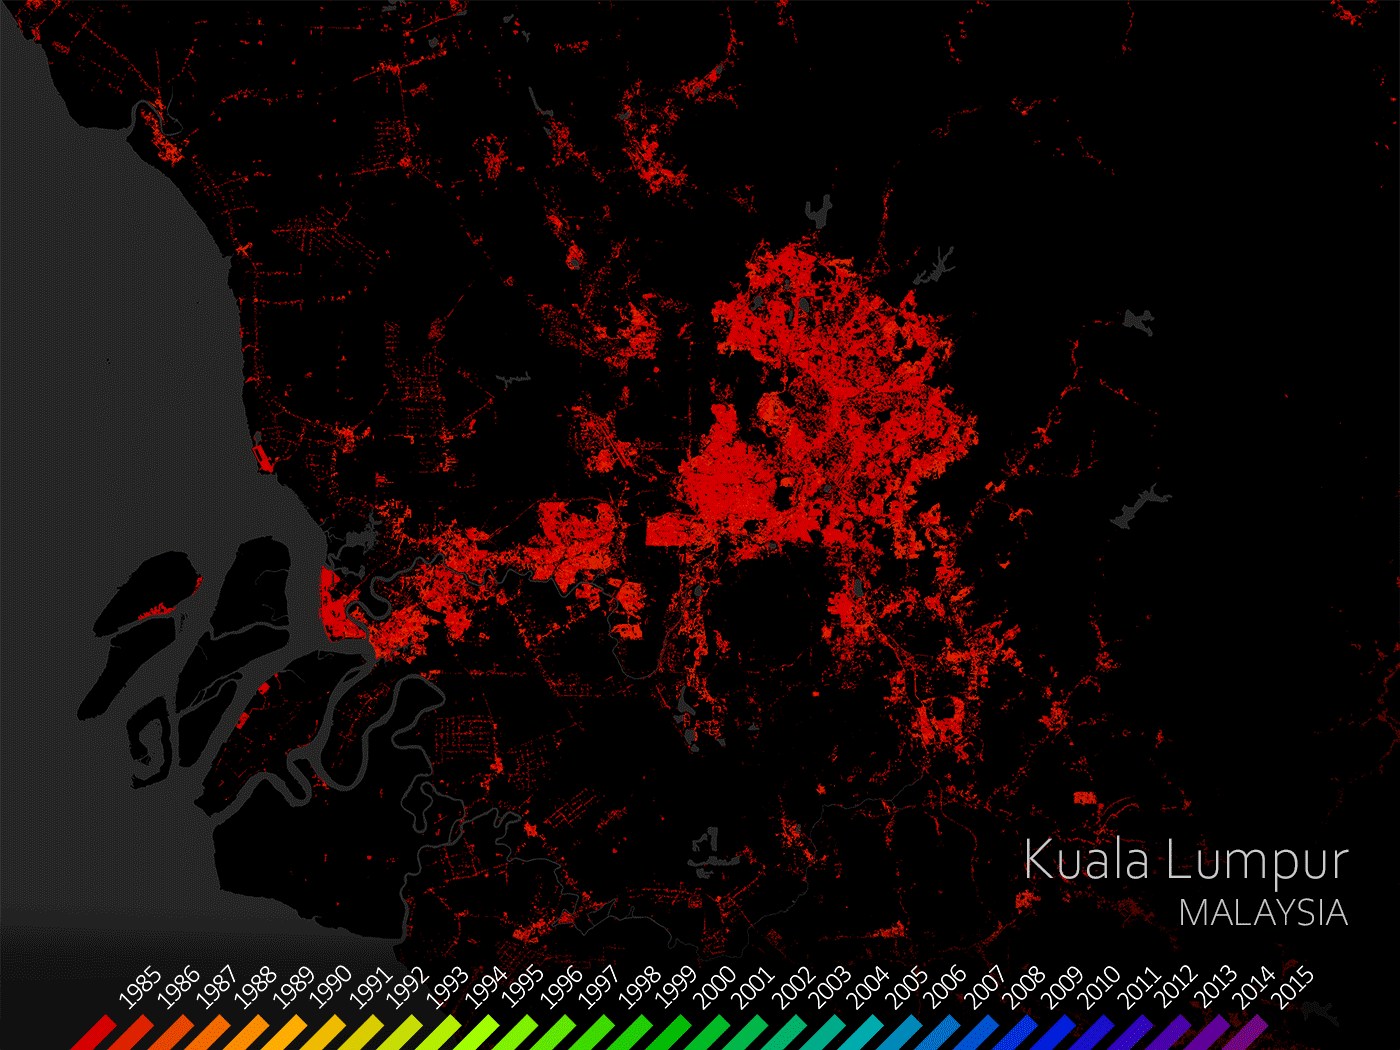 Figure 6: Kuala Lumpur, Malaysia. The World Settlement Footprint Evolution has been generated by processing seven million images from the US Landsat satellite collected between 1985 and 2015 and illustrates the worldwide growth of human settlements on a year-by-year basis (image credit: DLR/ESA)